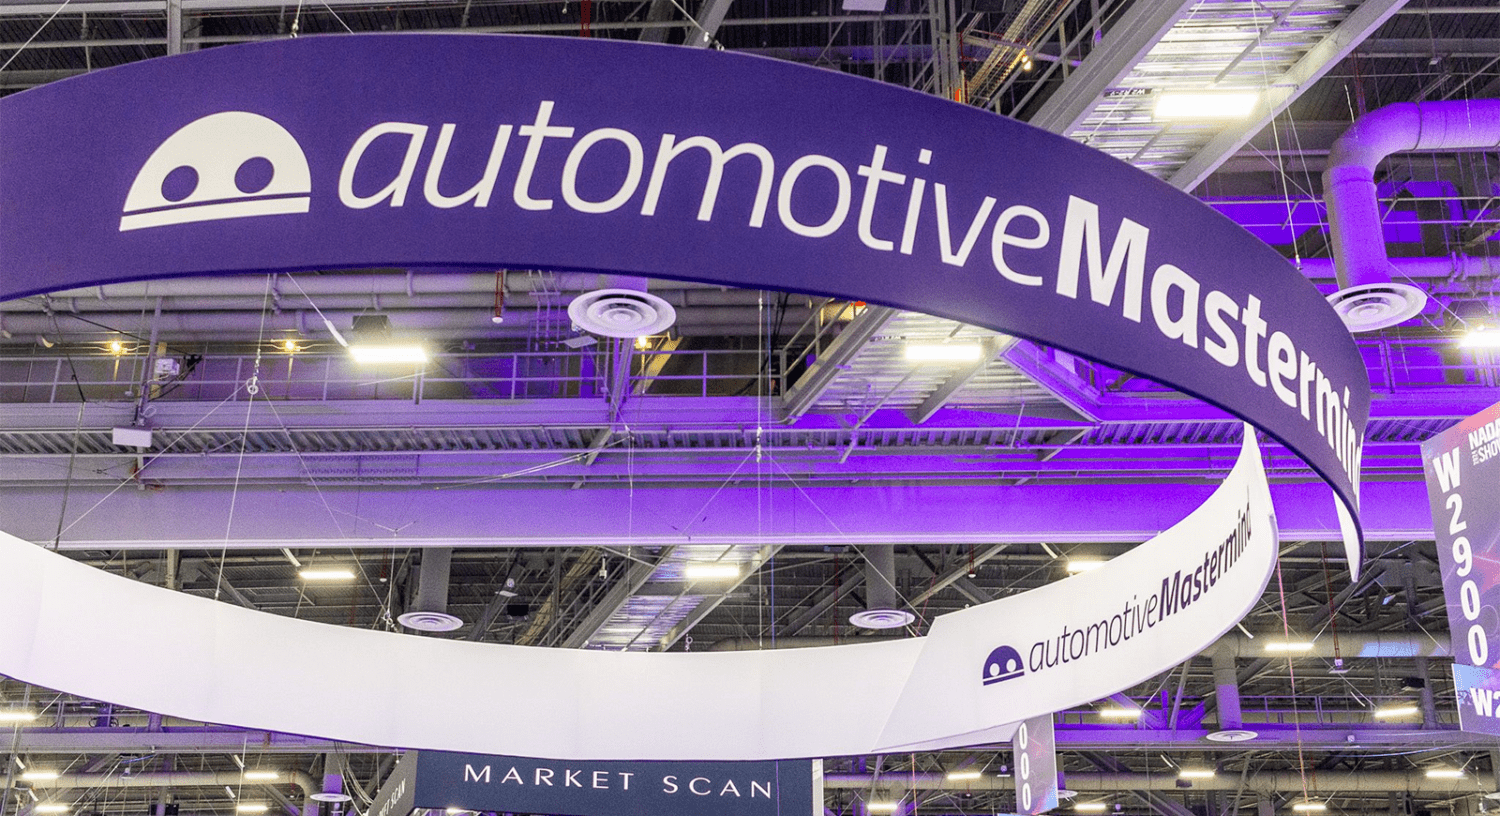 automotiveMastermind announced a strategic integration partnership with CarNow, marking a significant step to enhance the consumer experience